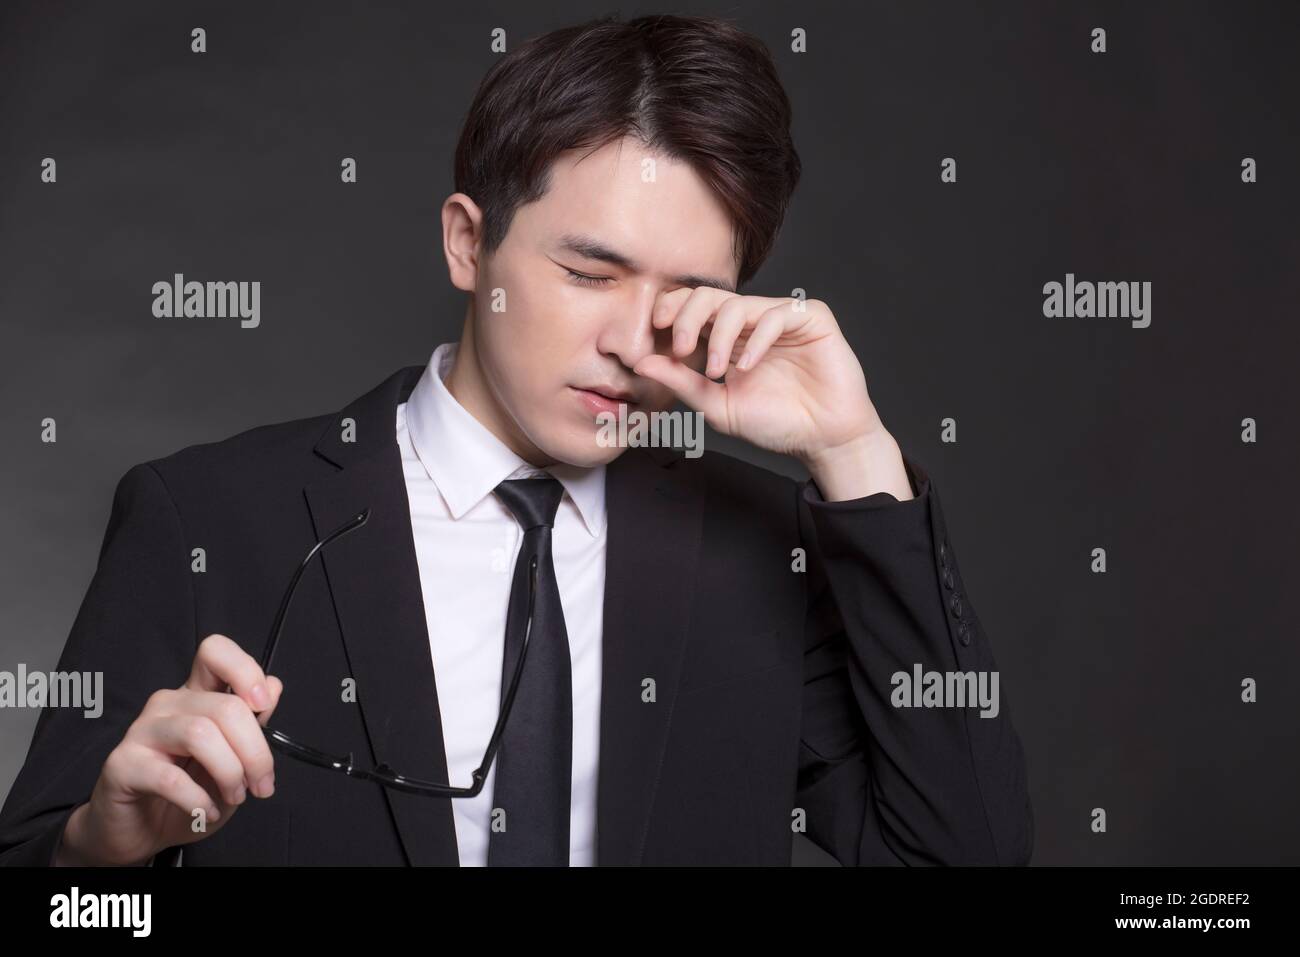 Business man feeling sick and tired. young man rubbing eyes Stock Photo